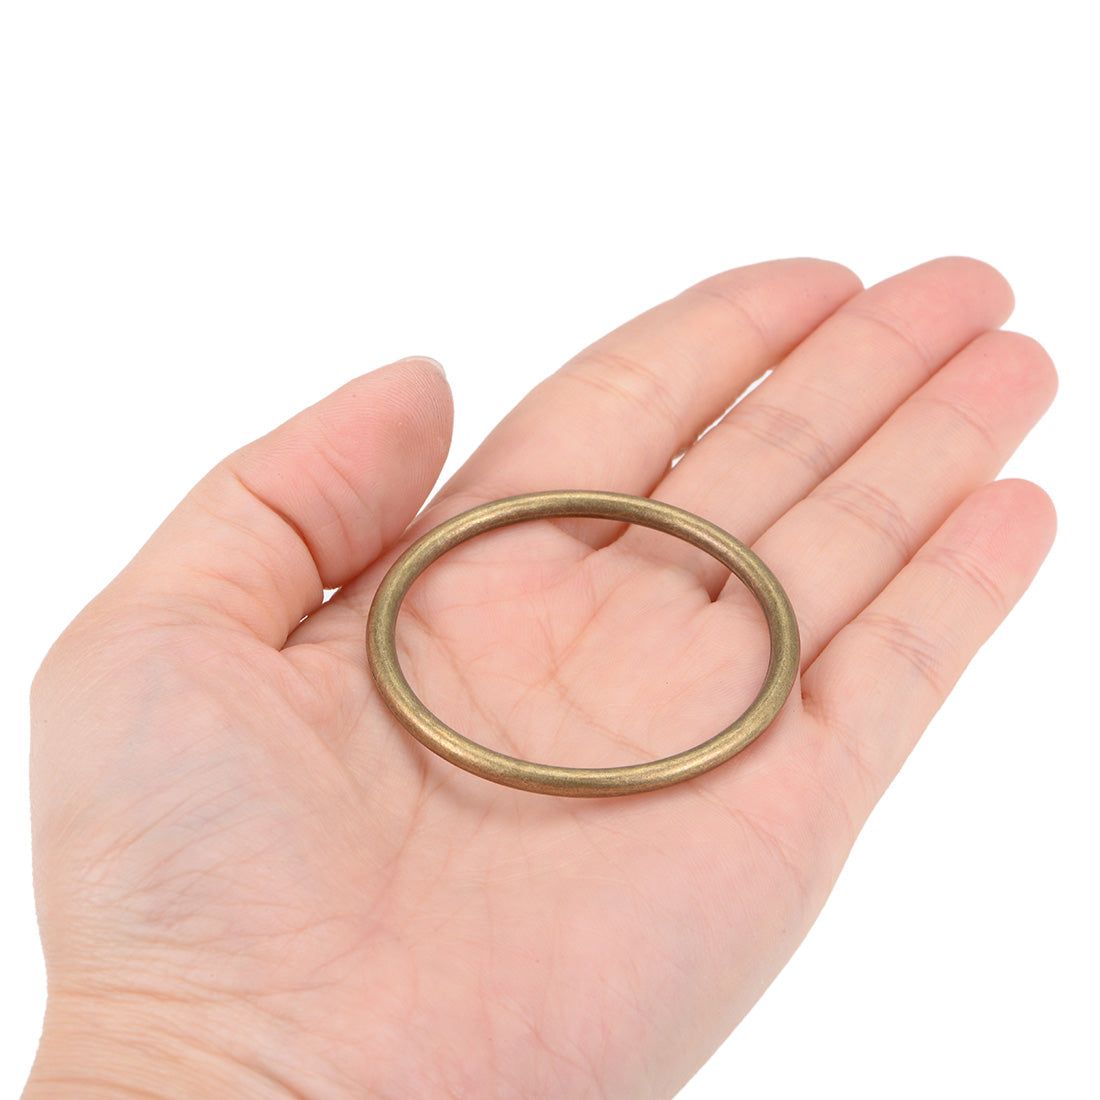 uxcell Uxcell O Ring Buckle 40mm(1.6") ID 3mm Thickness Zinc Alloy O-Rings for Hardware Bags Belts Craft DIY Accessories, Bronze Tone 5pcs